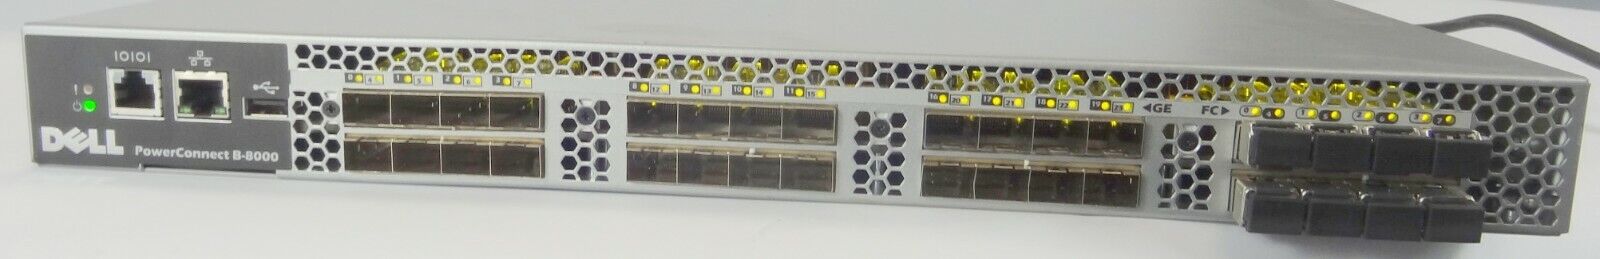  Dell Powerconnect B-8000 Layer 2 Switch CEE/DCB and FCo 23 Port